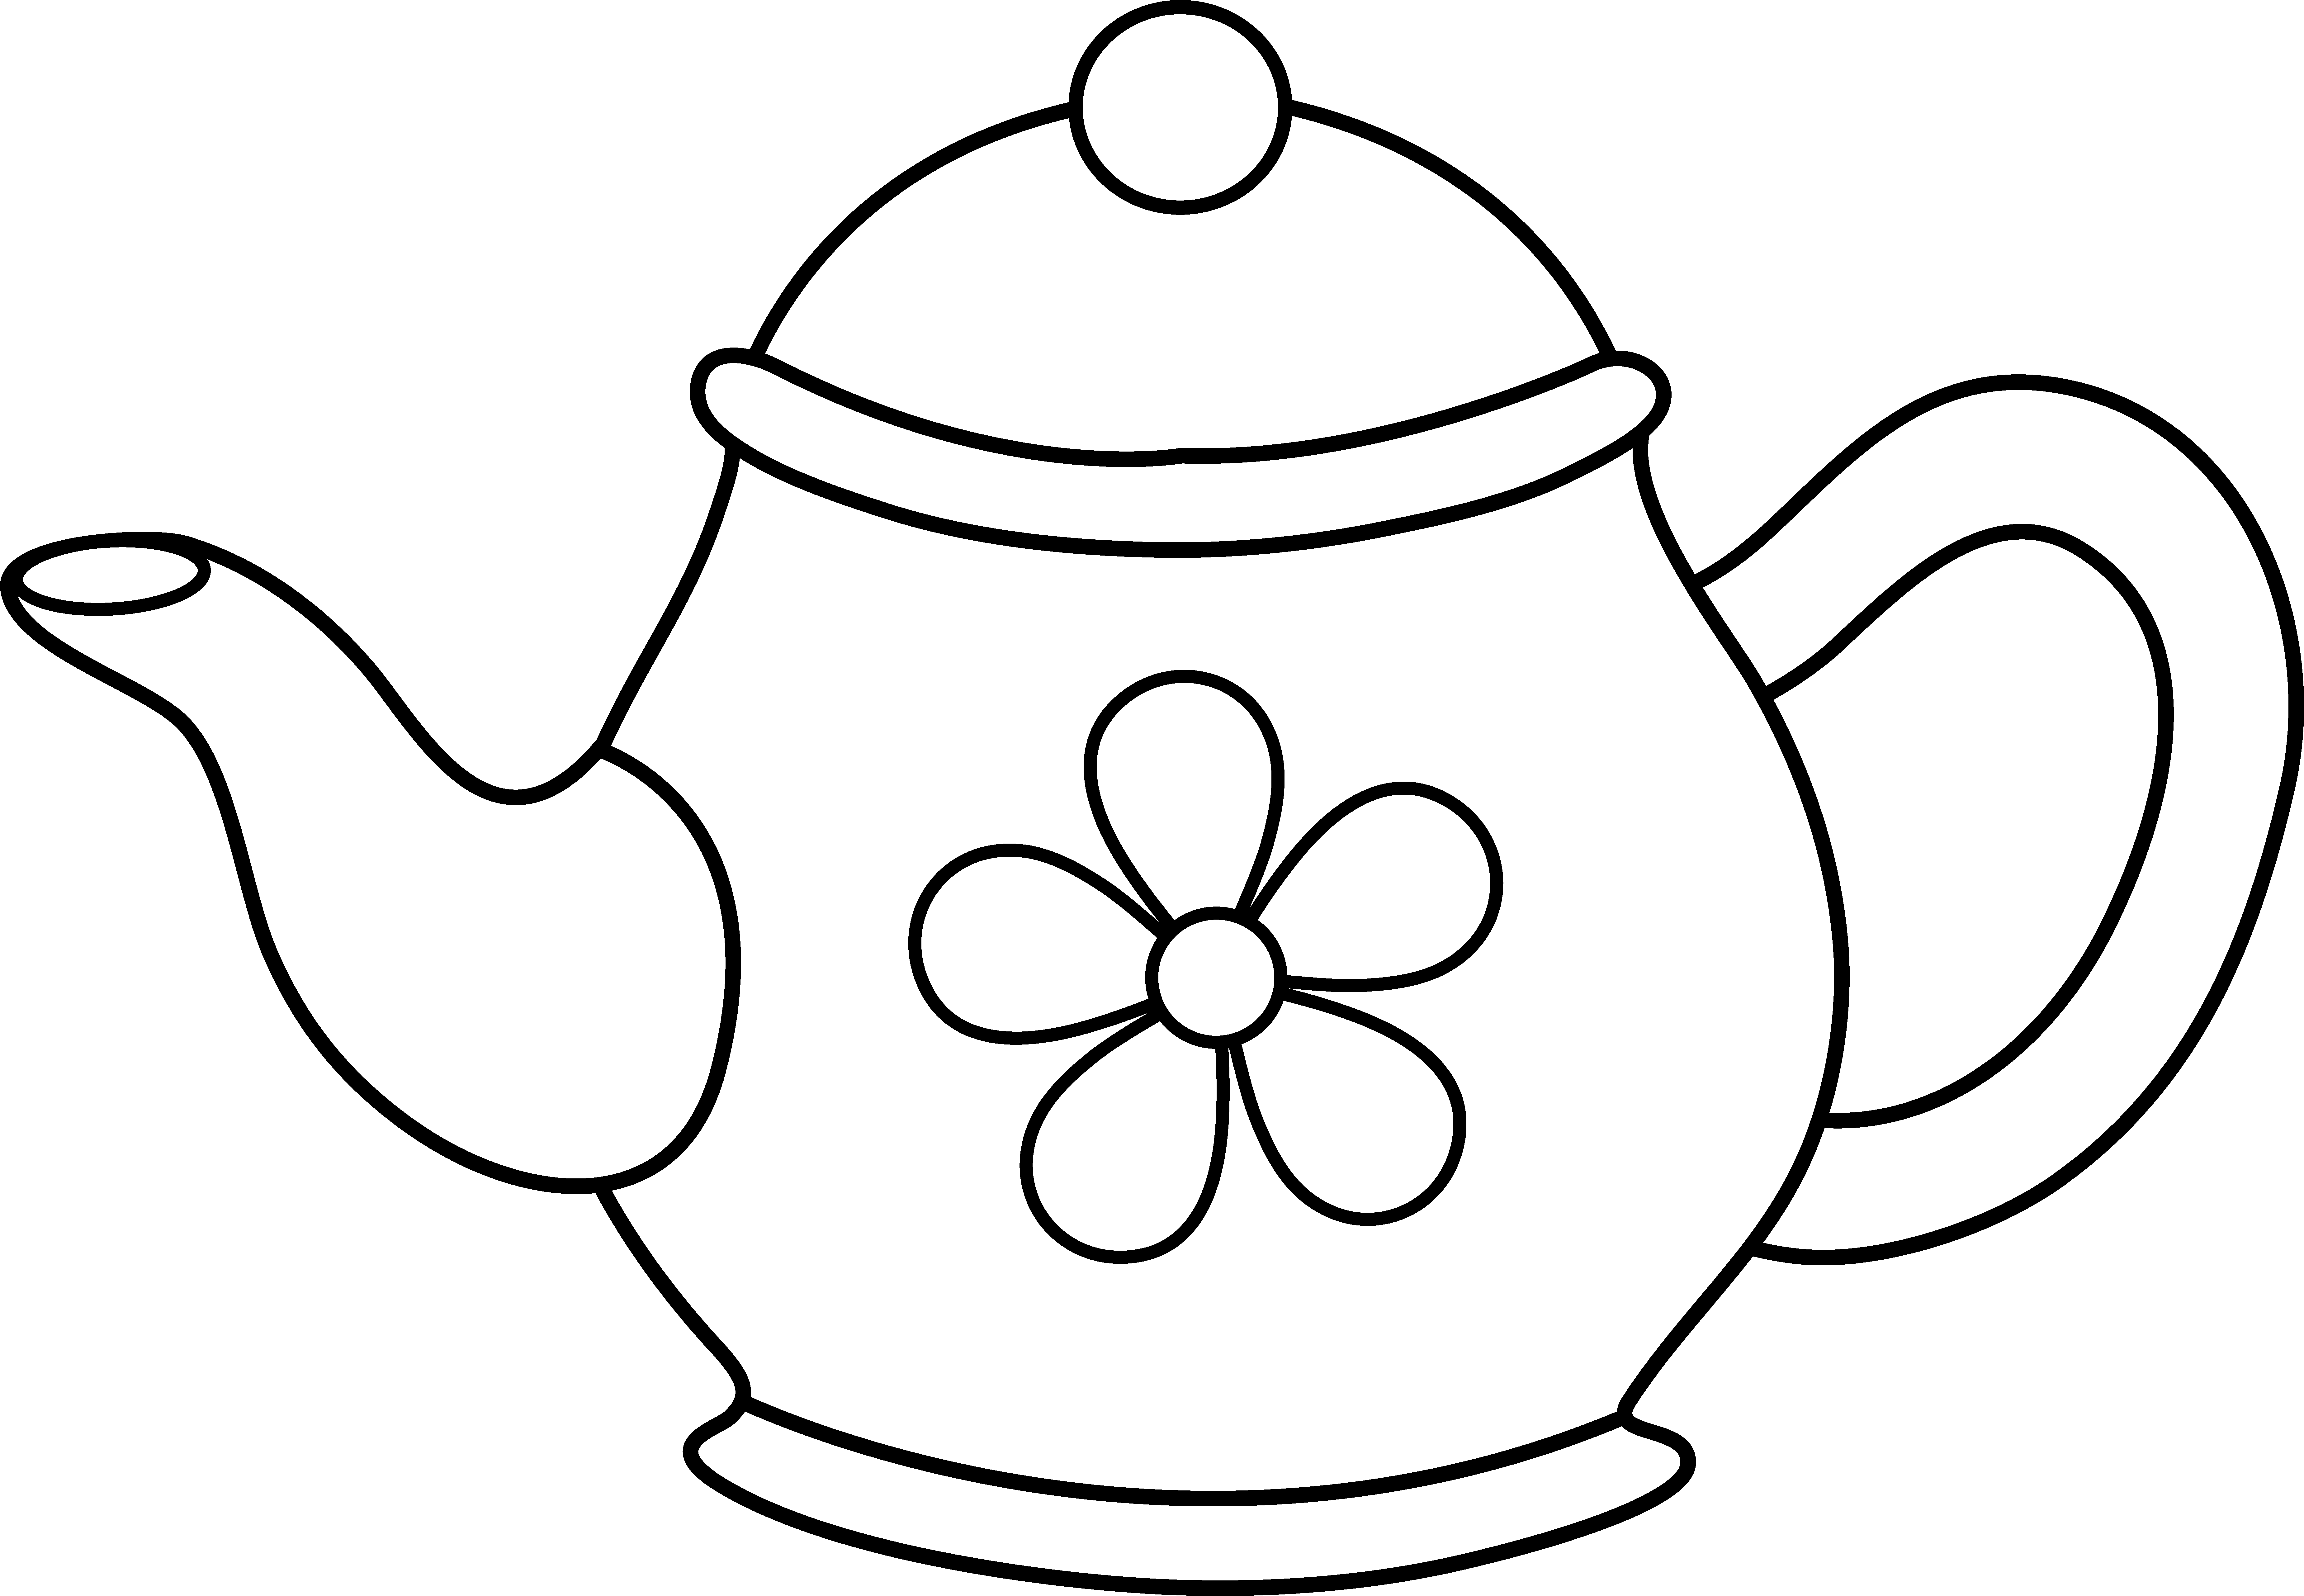 Coloring picture of a teapot